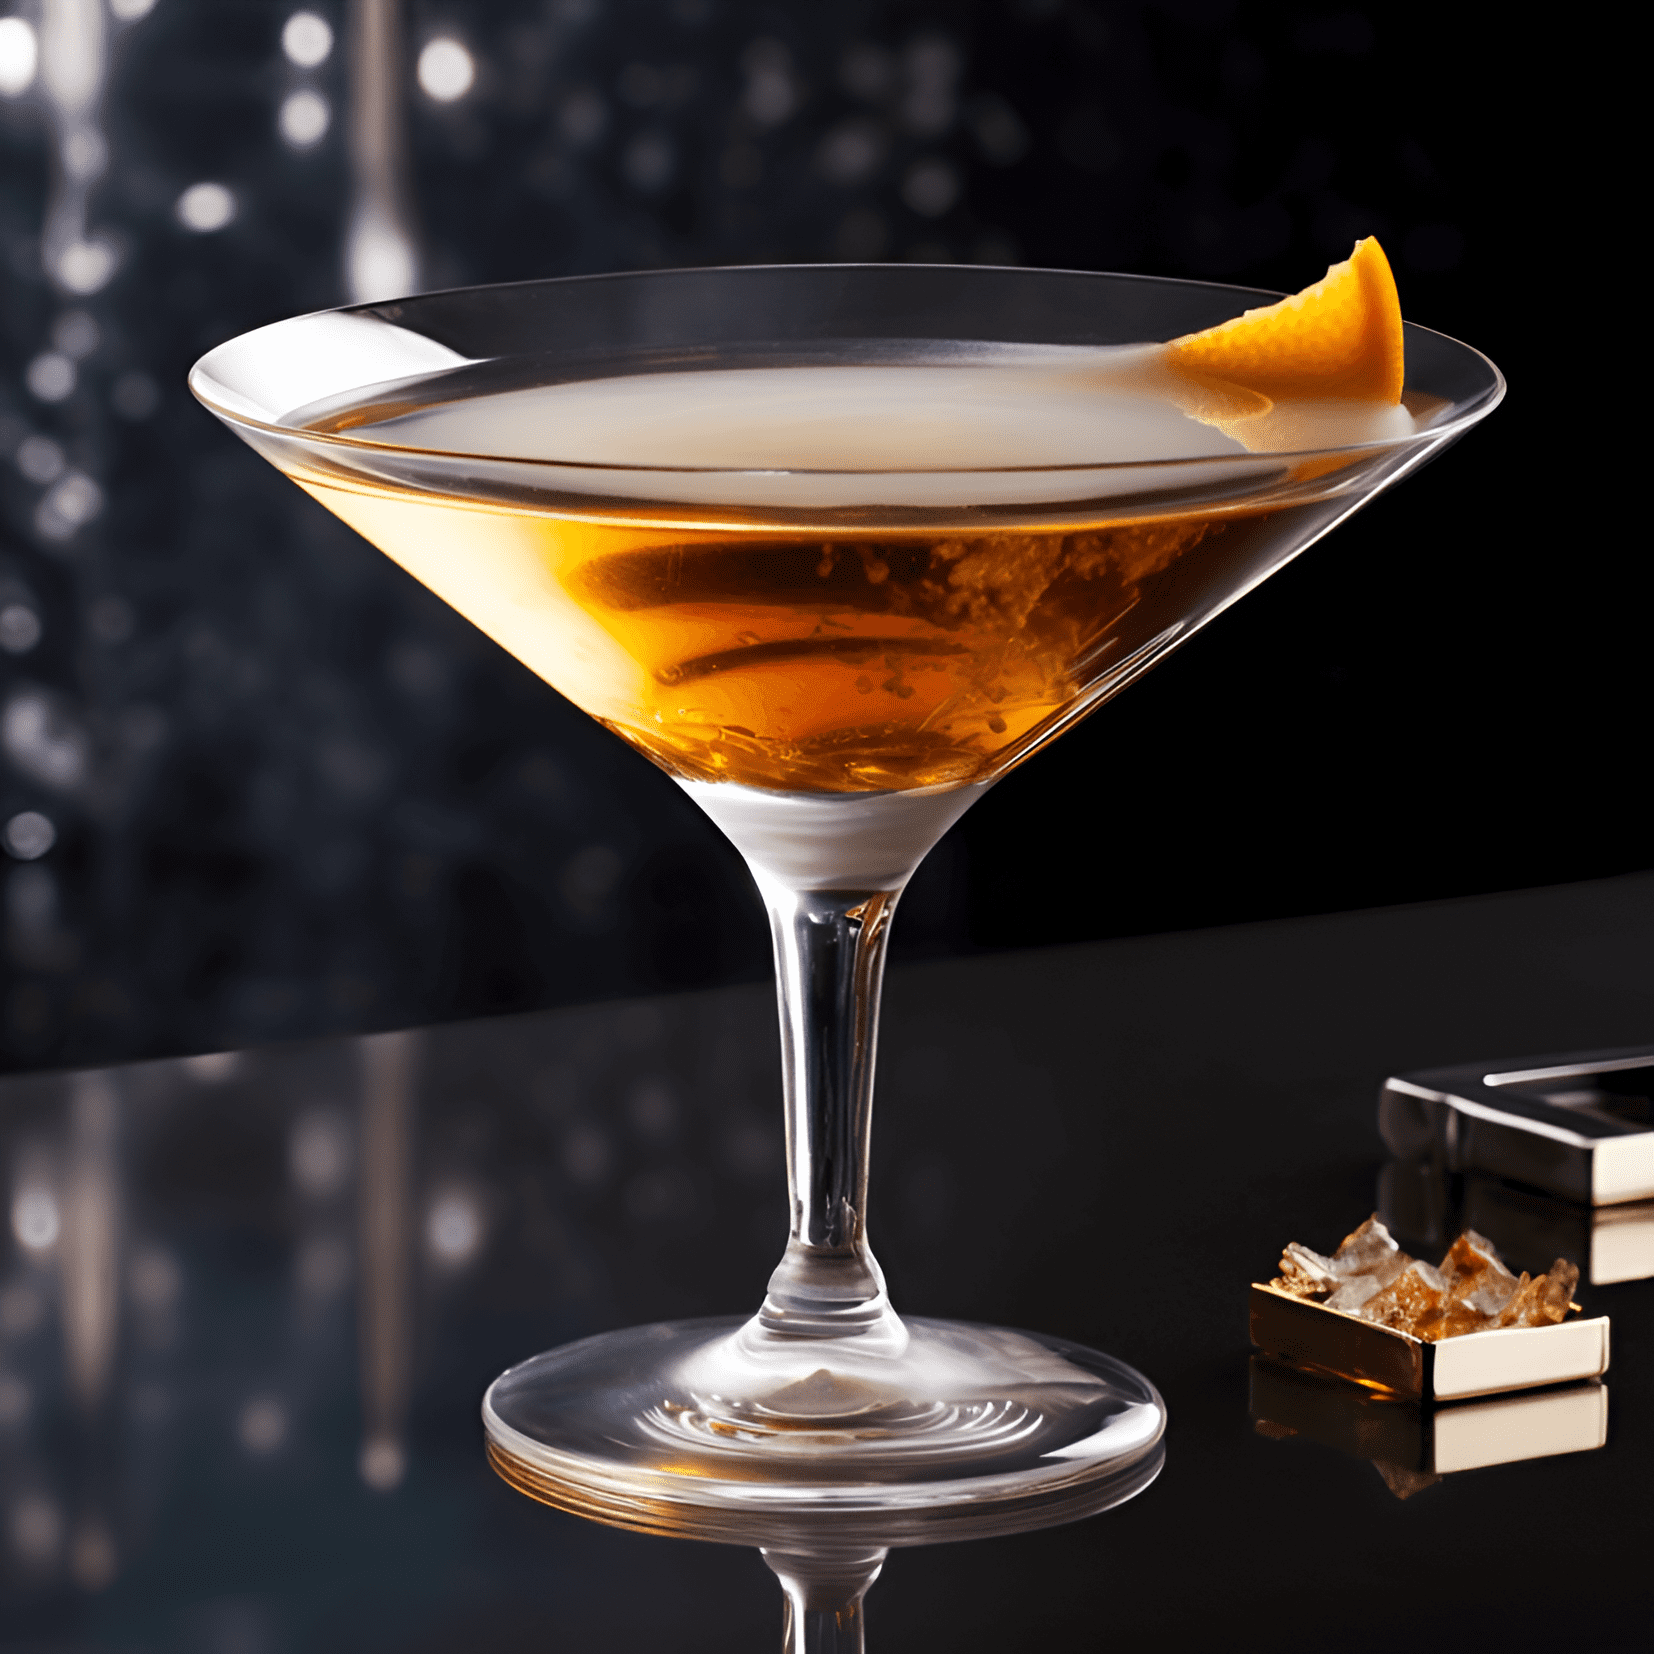 Moonraker Cocktail Recipe - The Moonraker cocktail has a well-balanced taste, with a combination of sweet, sour, and slightly bitter notes. It is a strong and full-bodied drink, with a smooth and velvety texture.